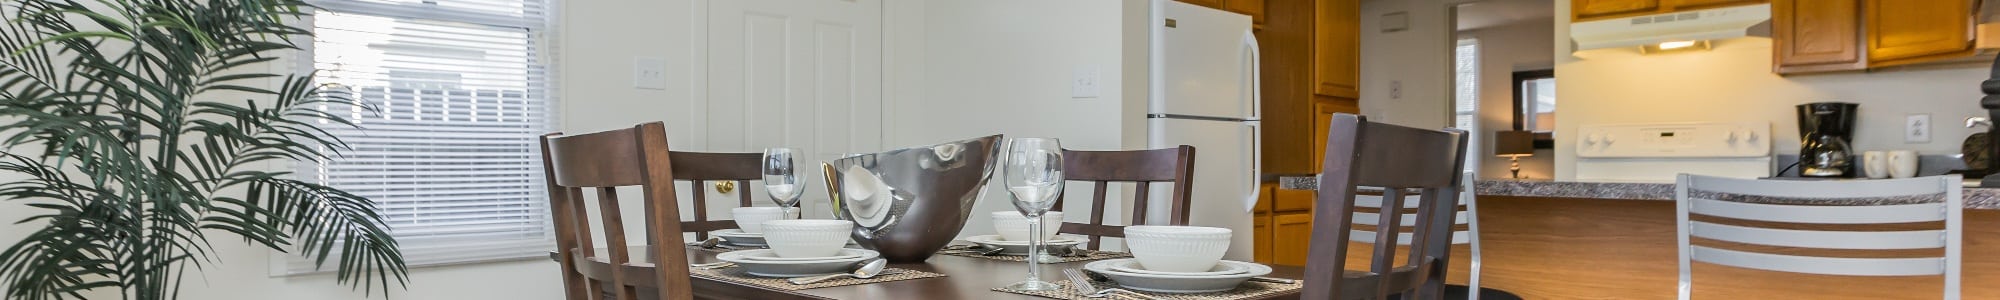 Schedule a tour to view our apartments in Joint Base Mdl, NJ